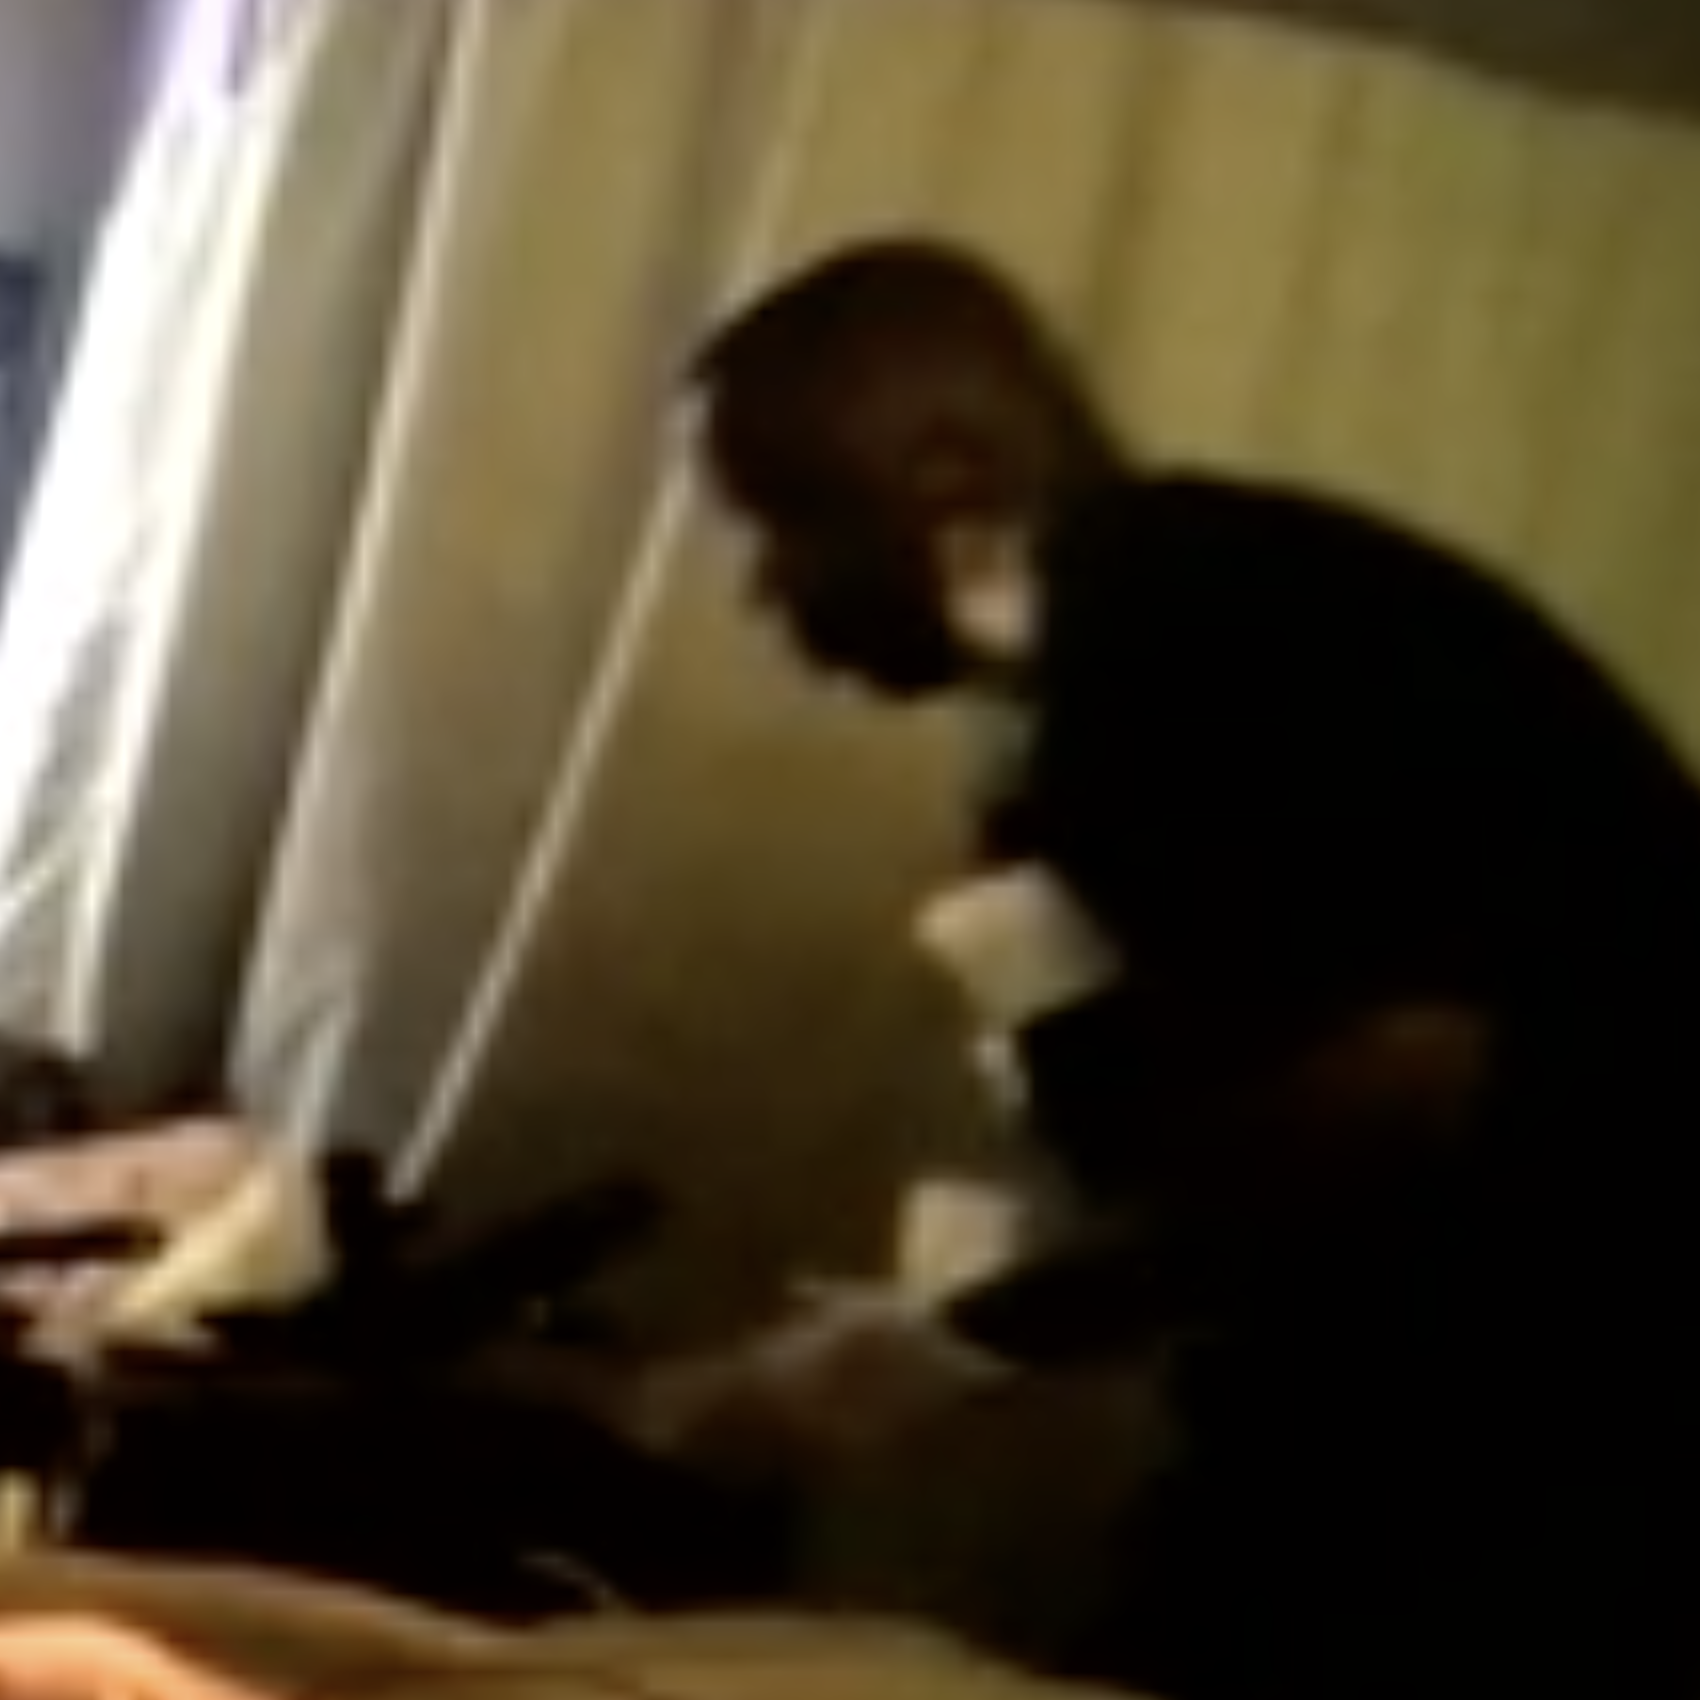 Family sets up hidden camera in nursing home, catches man sexually assaulting patient Image